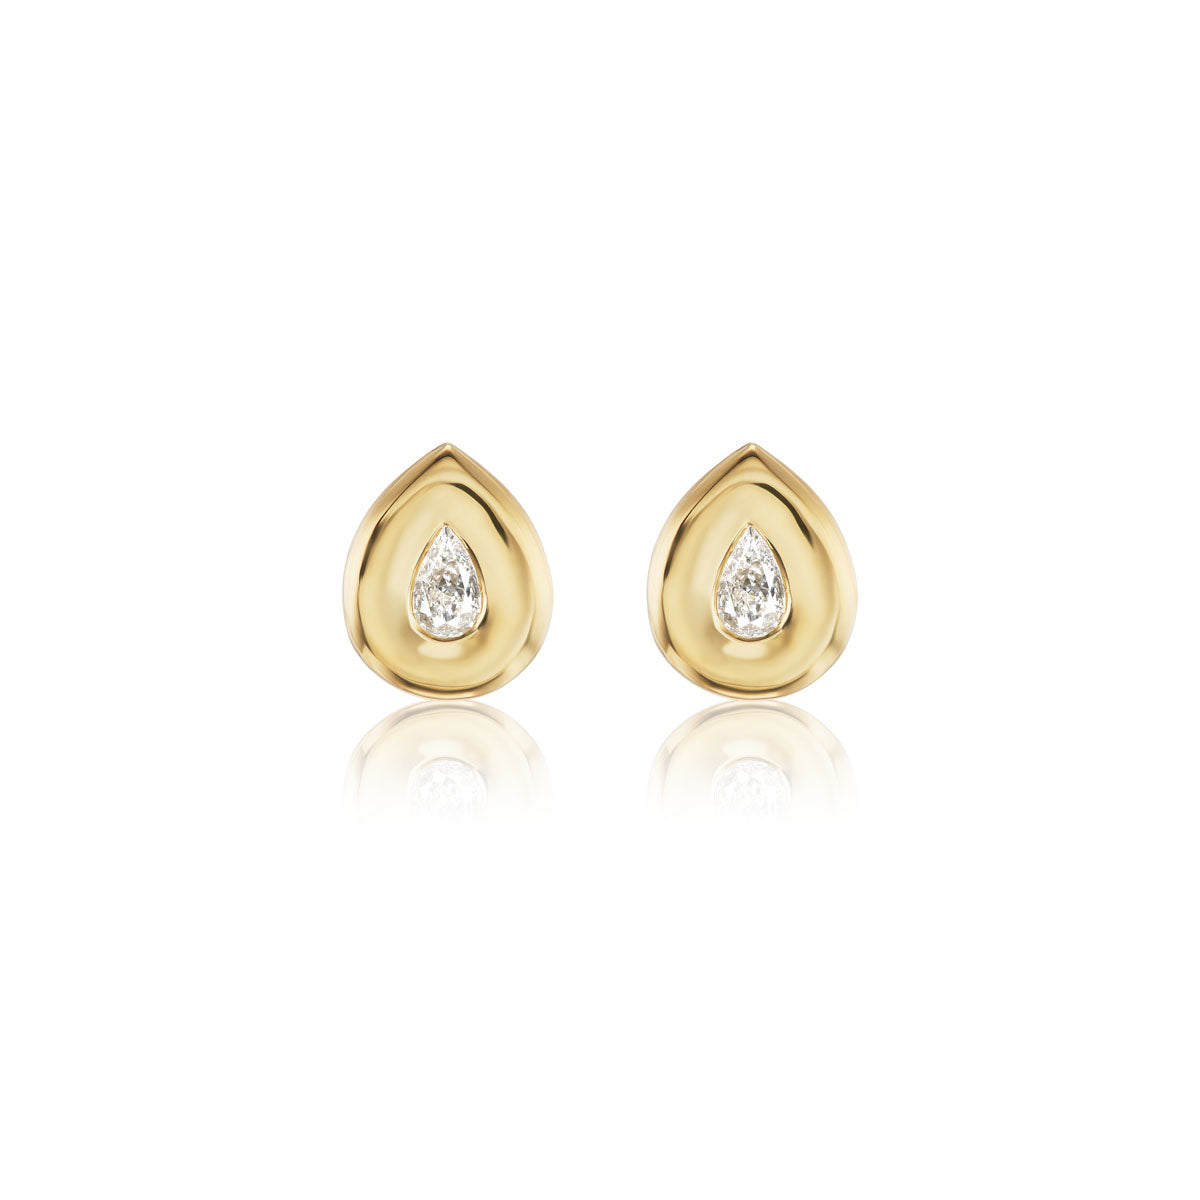 THE CURVE STUDS - PEAR